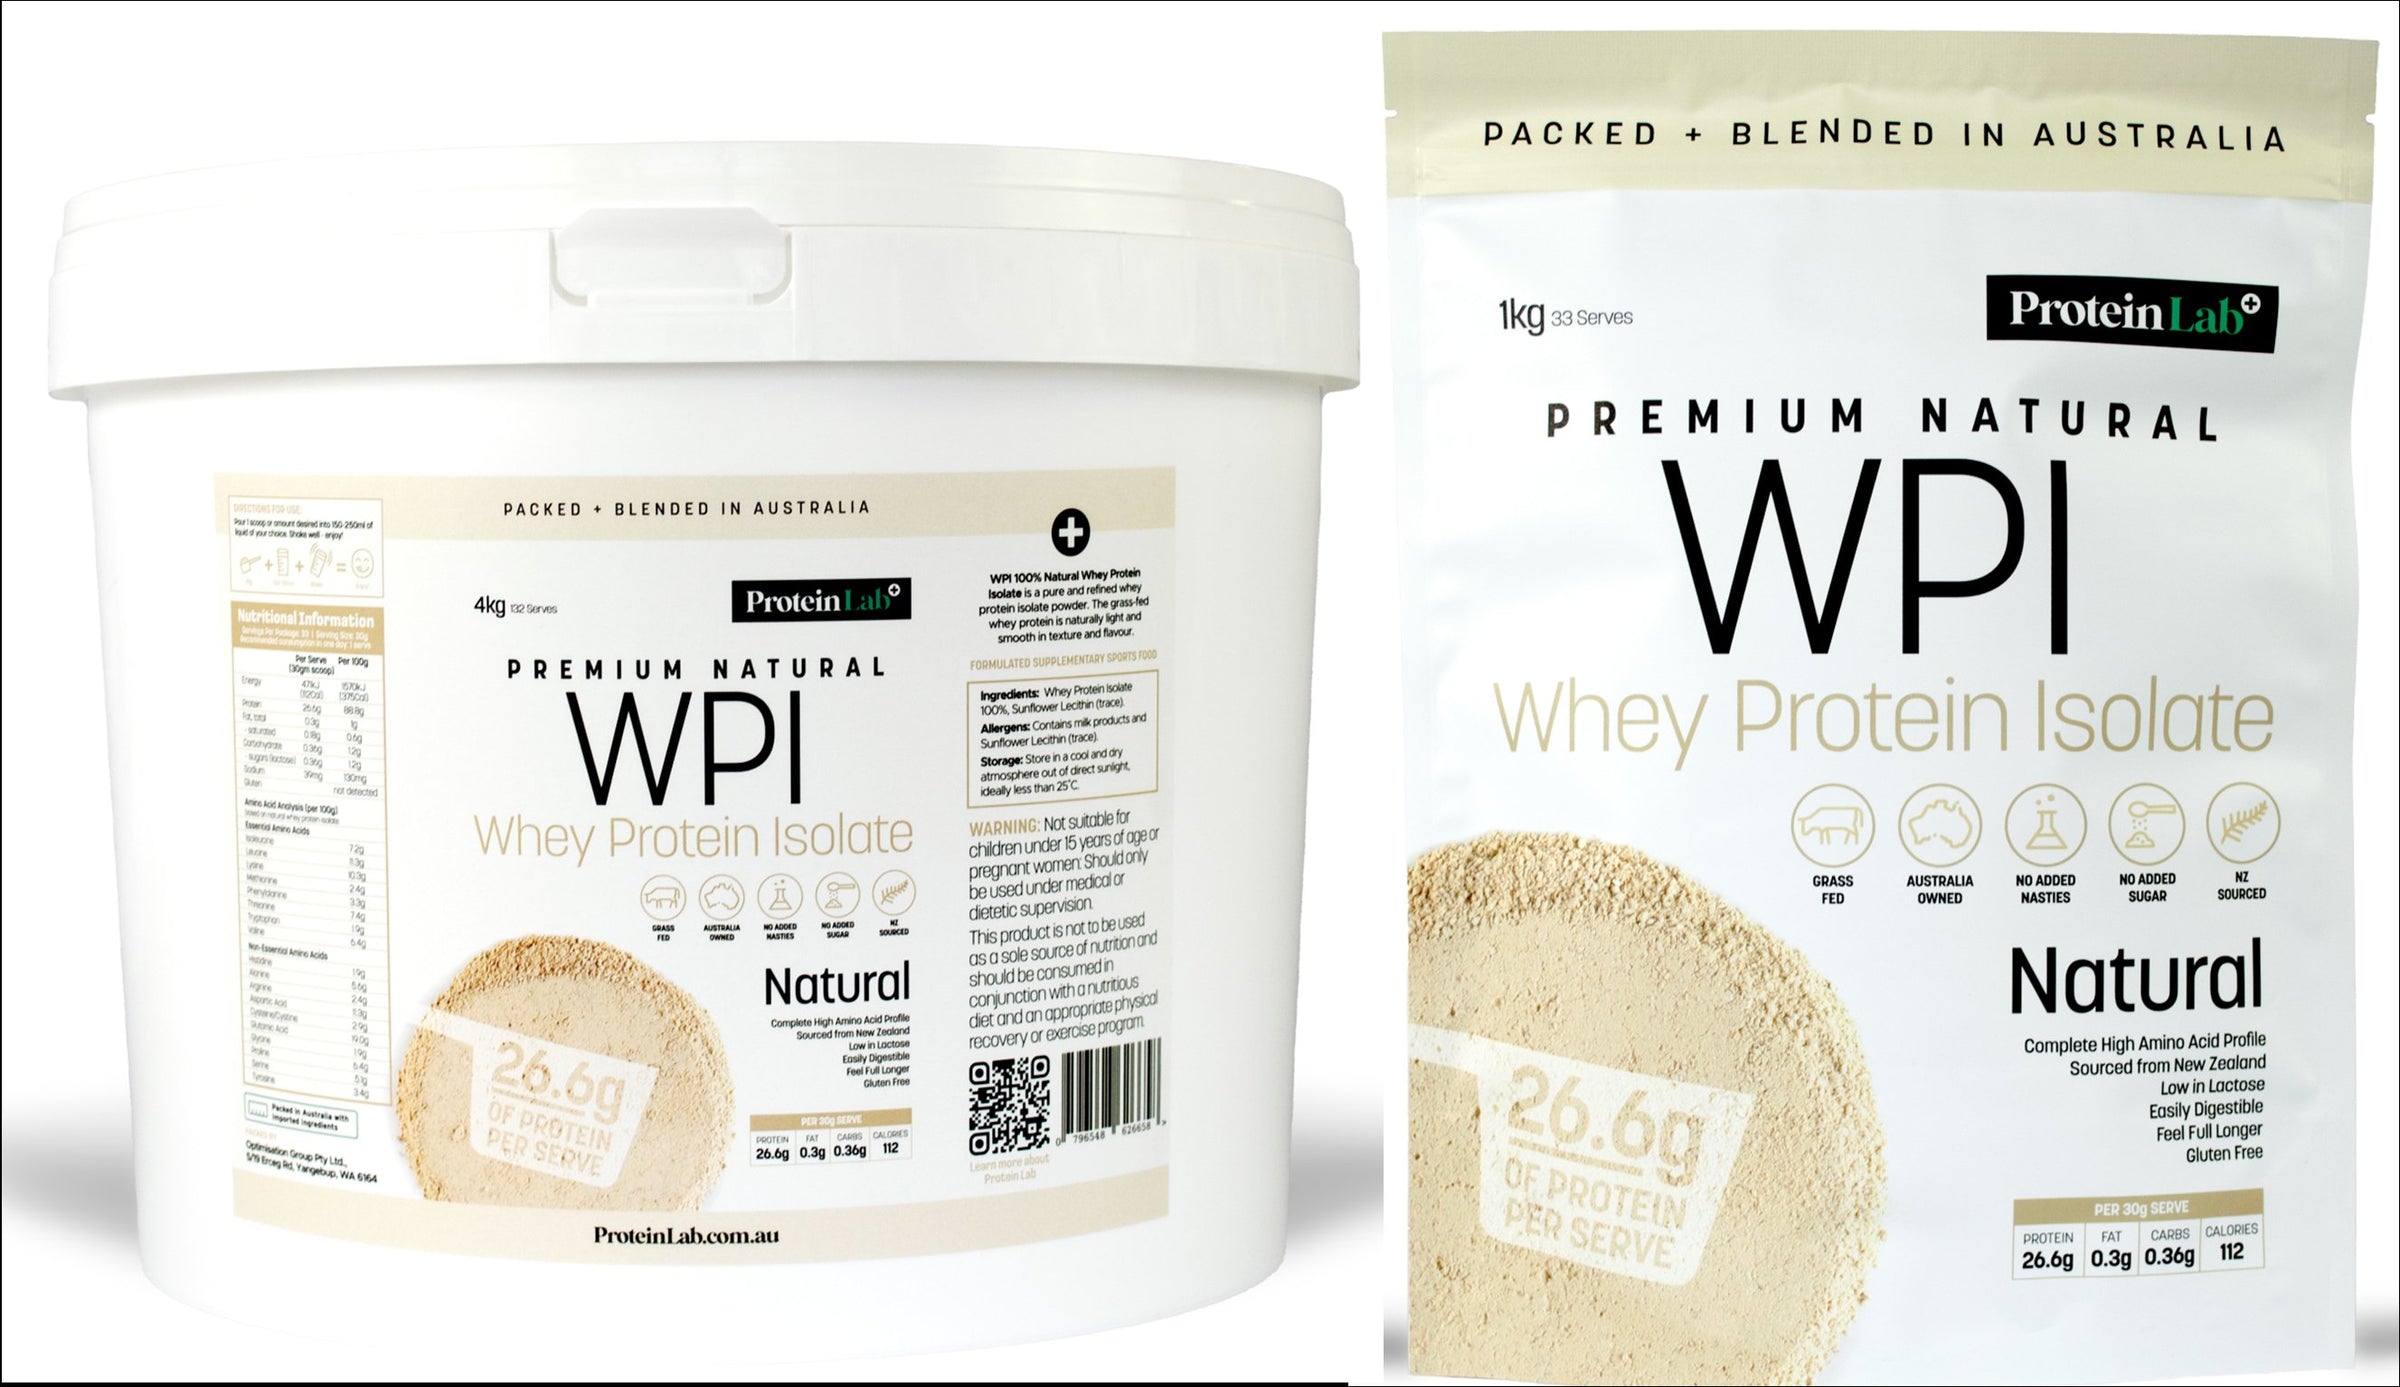 ProteinLab Natural Whey Protein Isolate 1kg